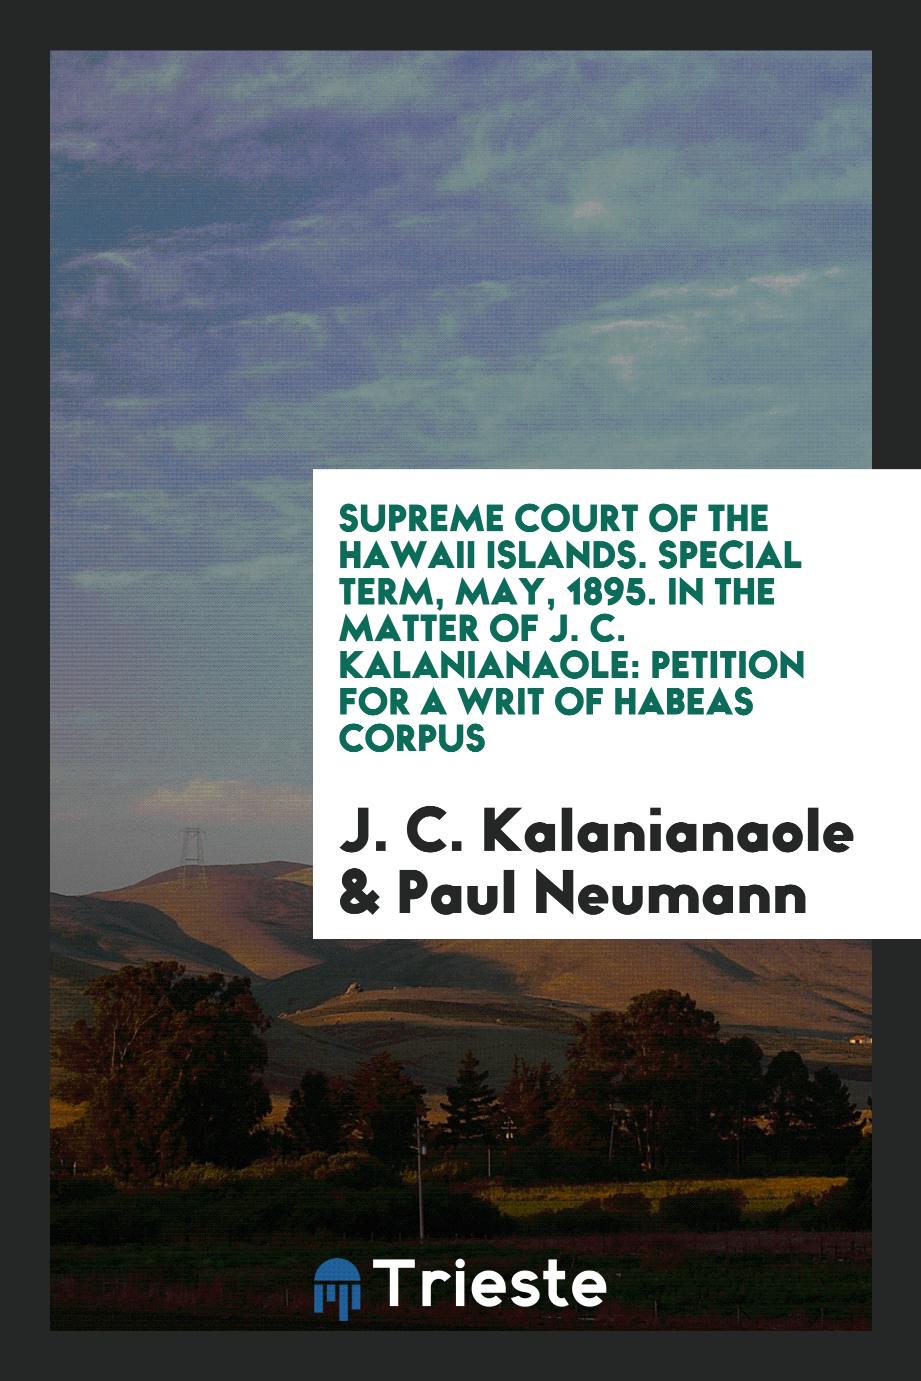 Supreme Court of the Hawaii Islands. Special Term, May, 1895. In the Matter of J. C. Kalanianaole: Petition for a Writ of Habeas Corpus